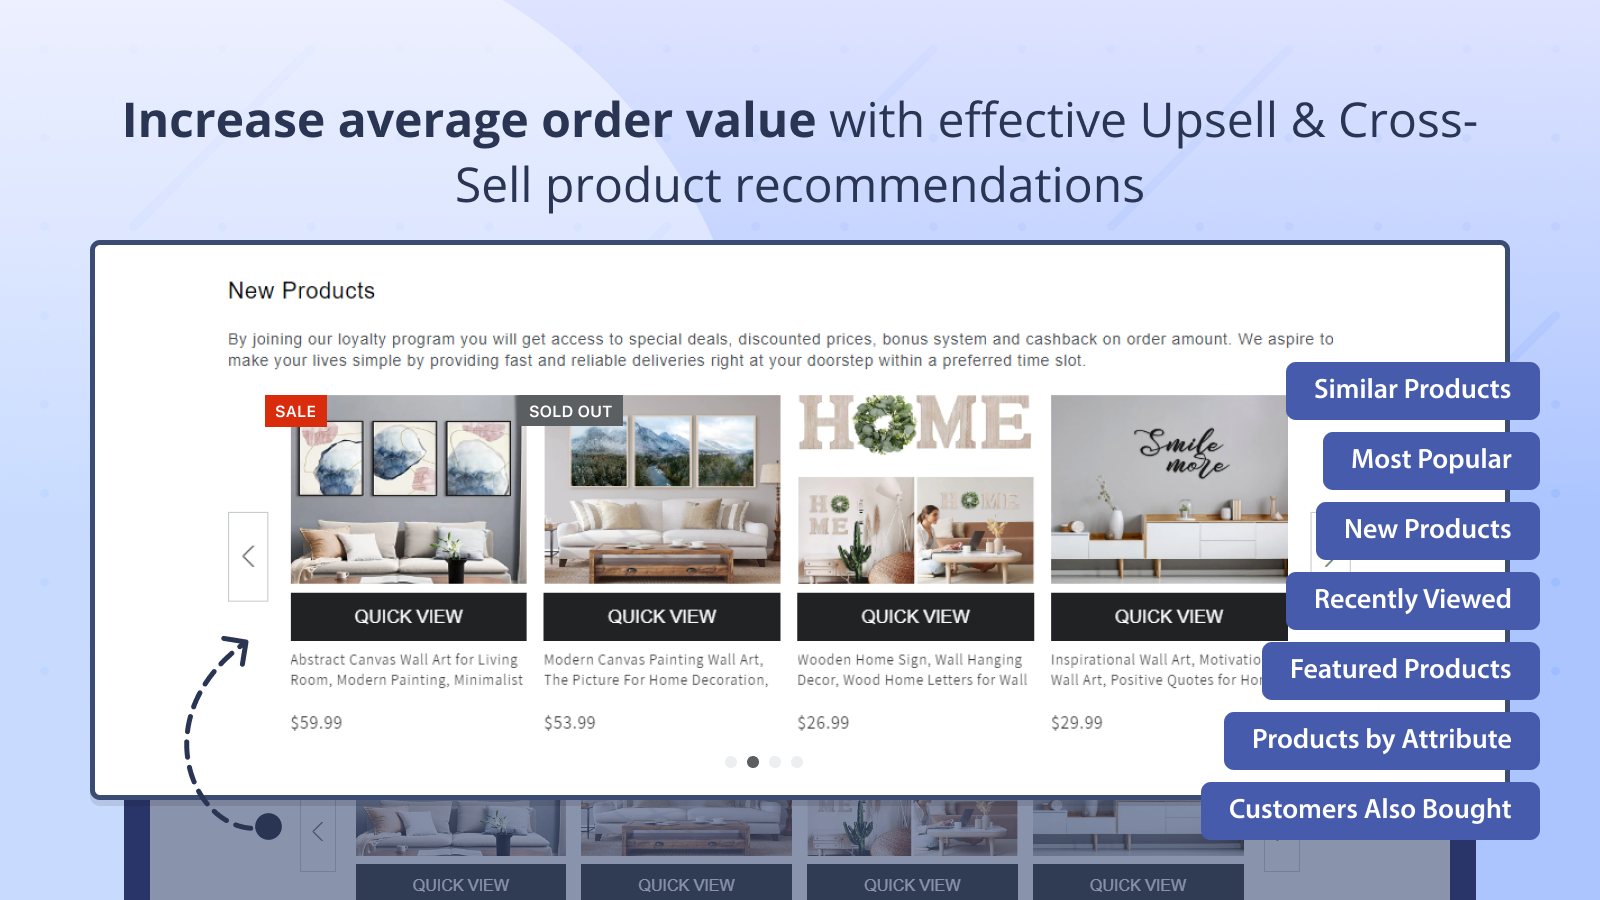 Increase average order value with vital product recommendations